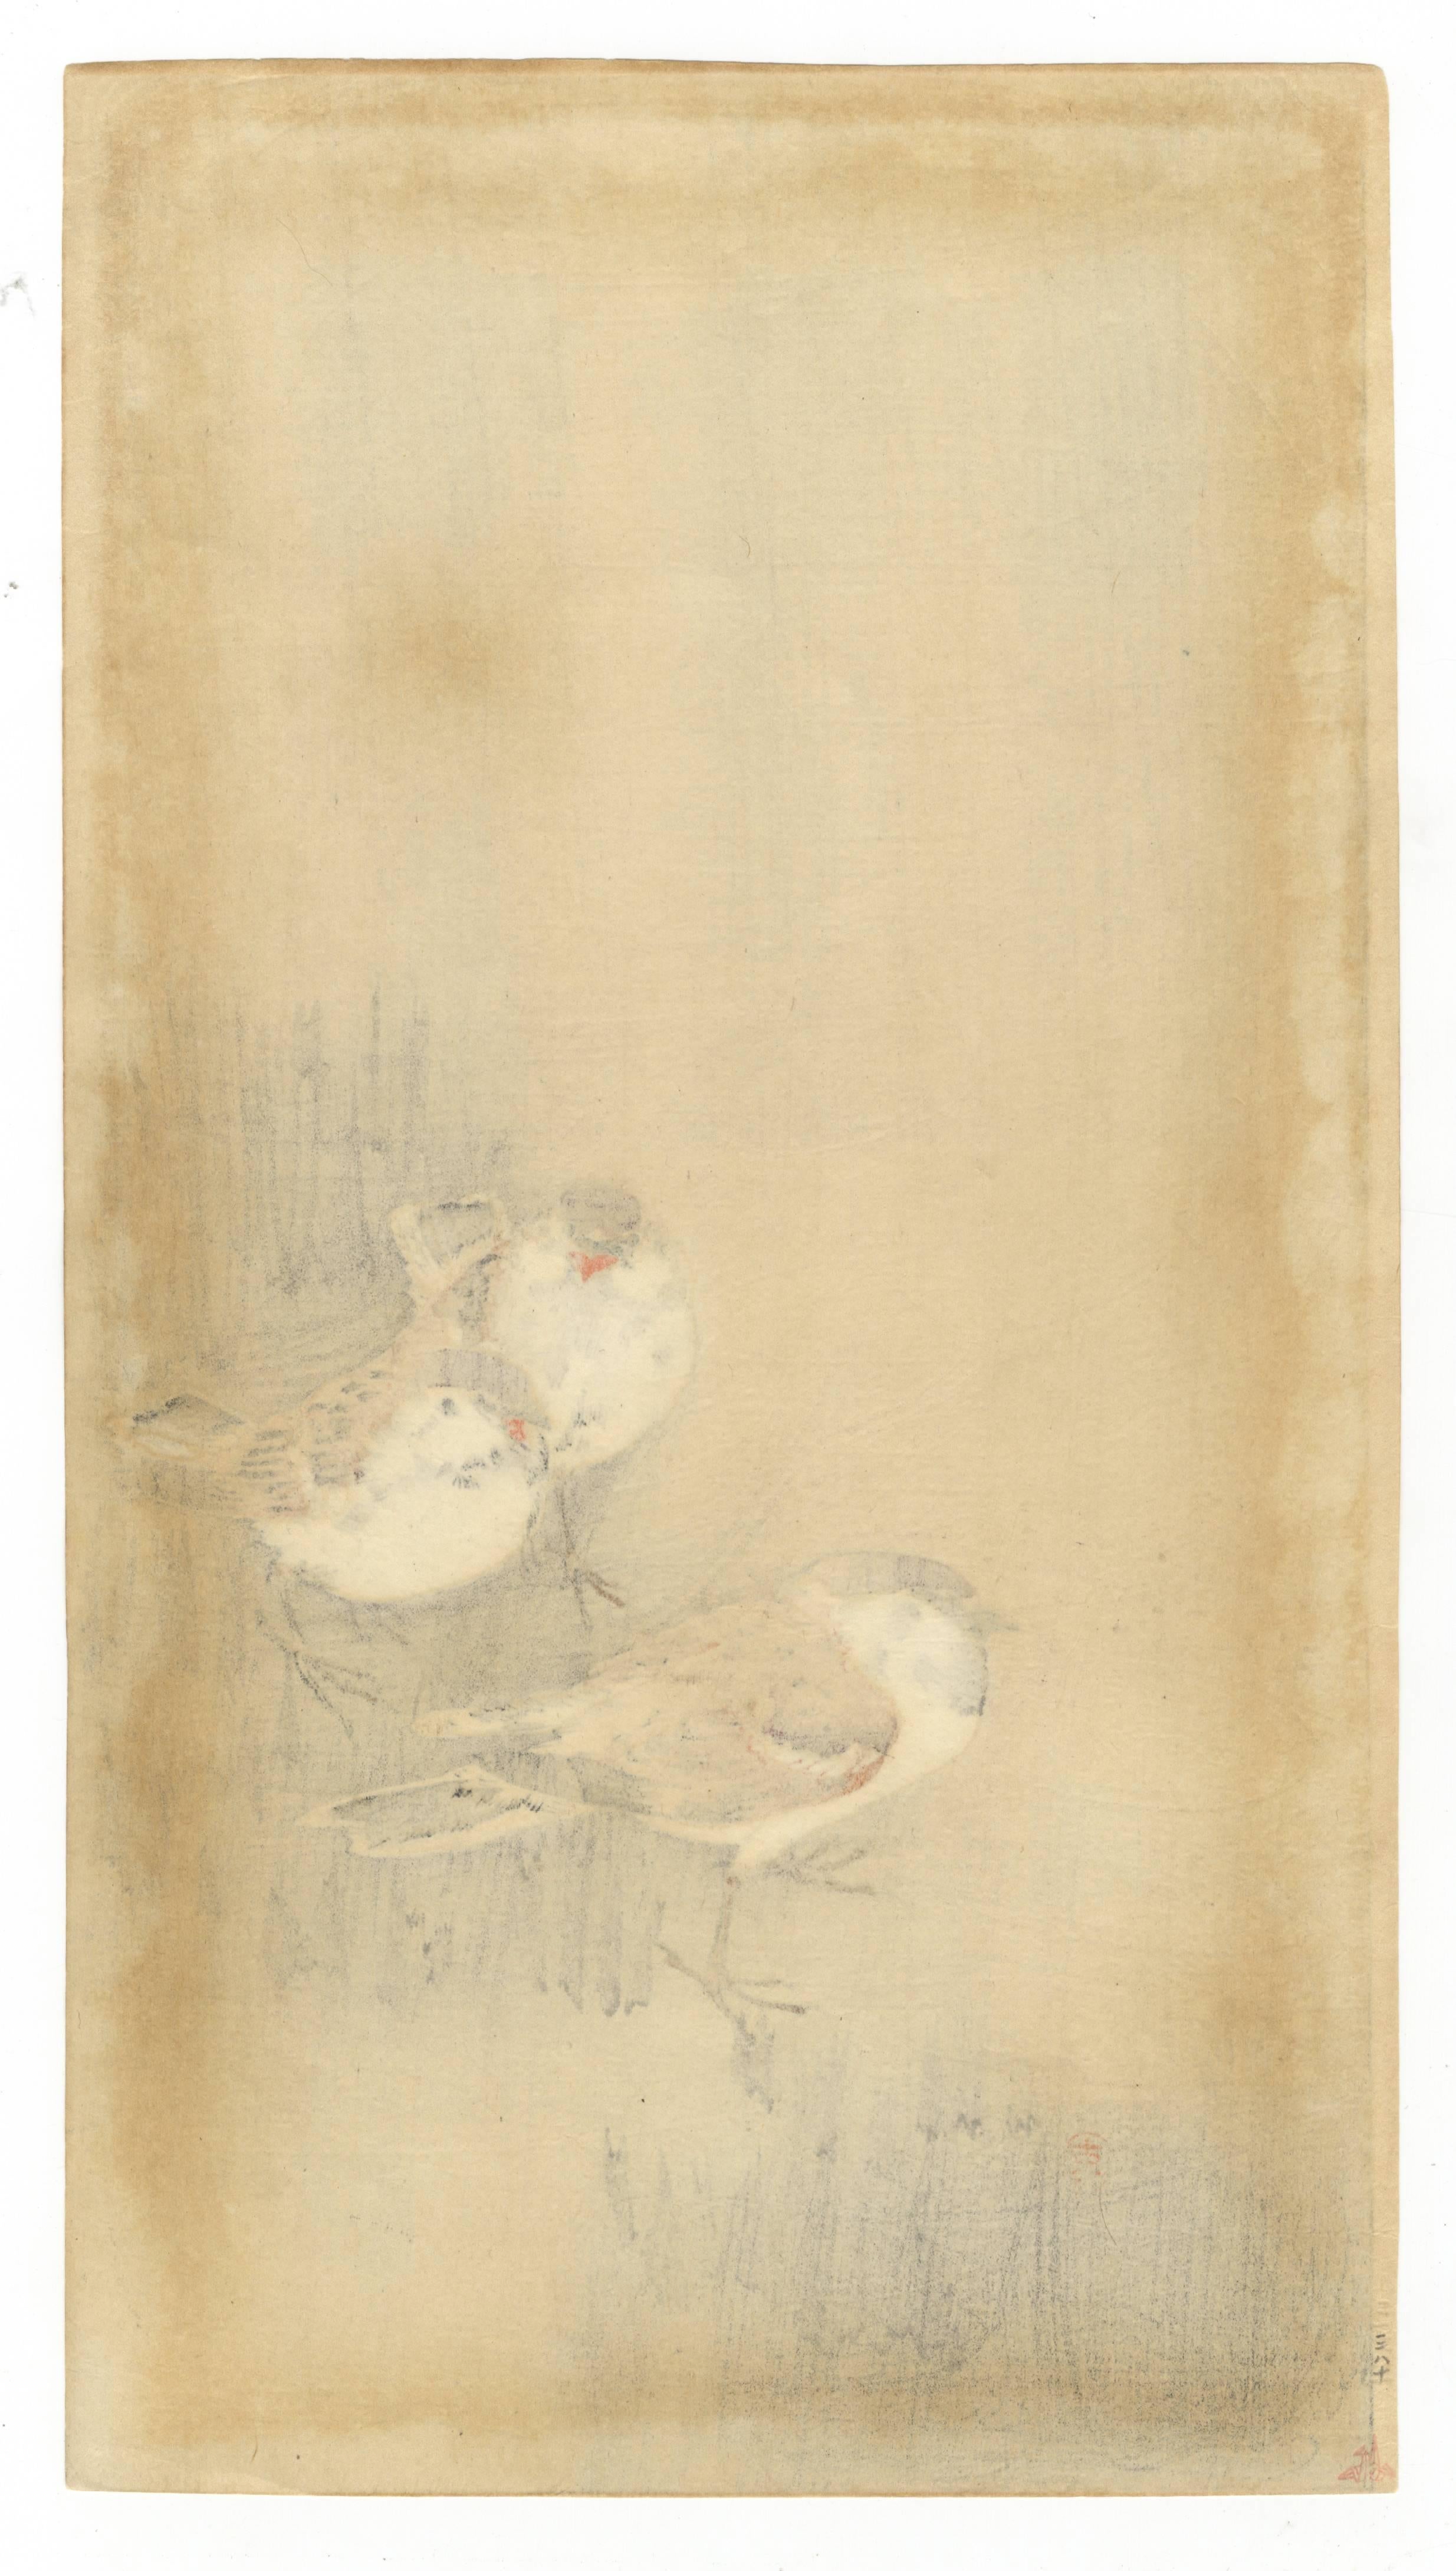 Artist: Koson Ohara (1877-1945)
Title: Three Sparrows in a Rain Shower
Published: 1900-1945

Ohara Koson was one of great print makers of the twentieth century, best known for his kacho-e, prints of flowers and birds.

Koson's prints after